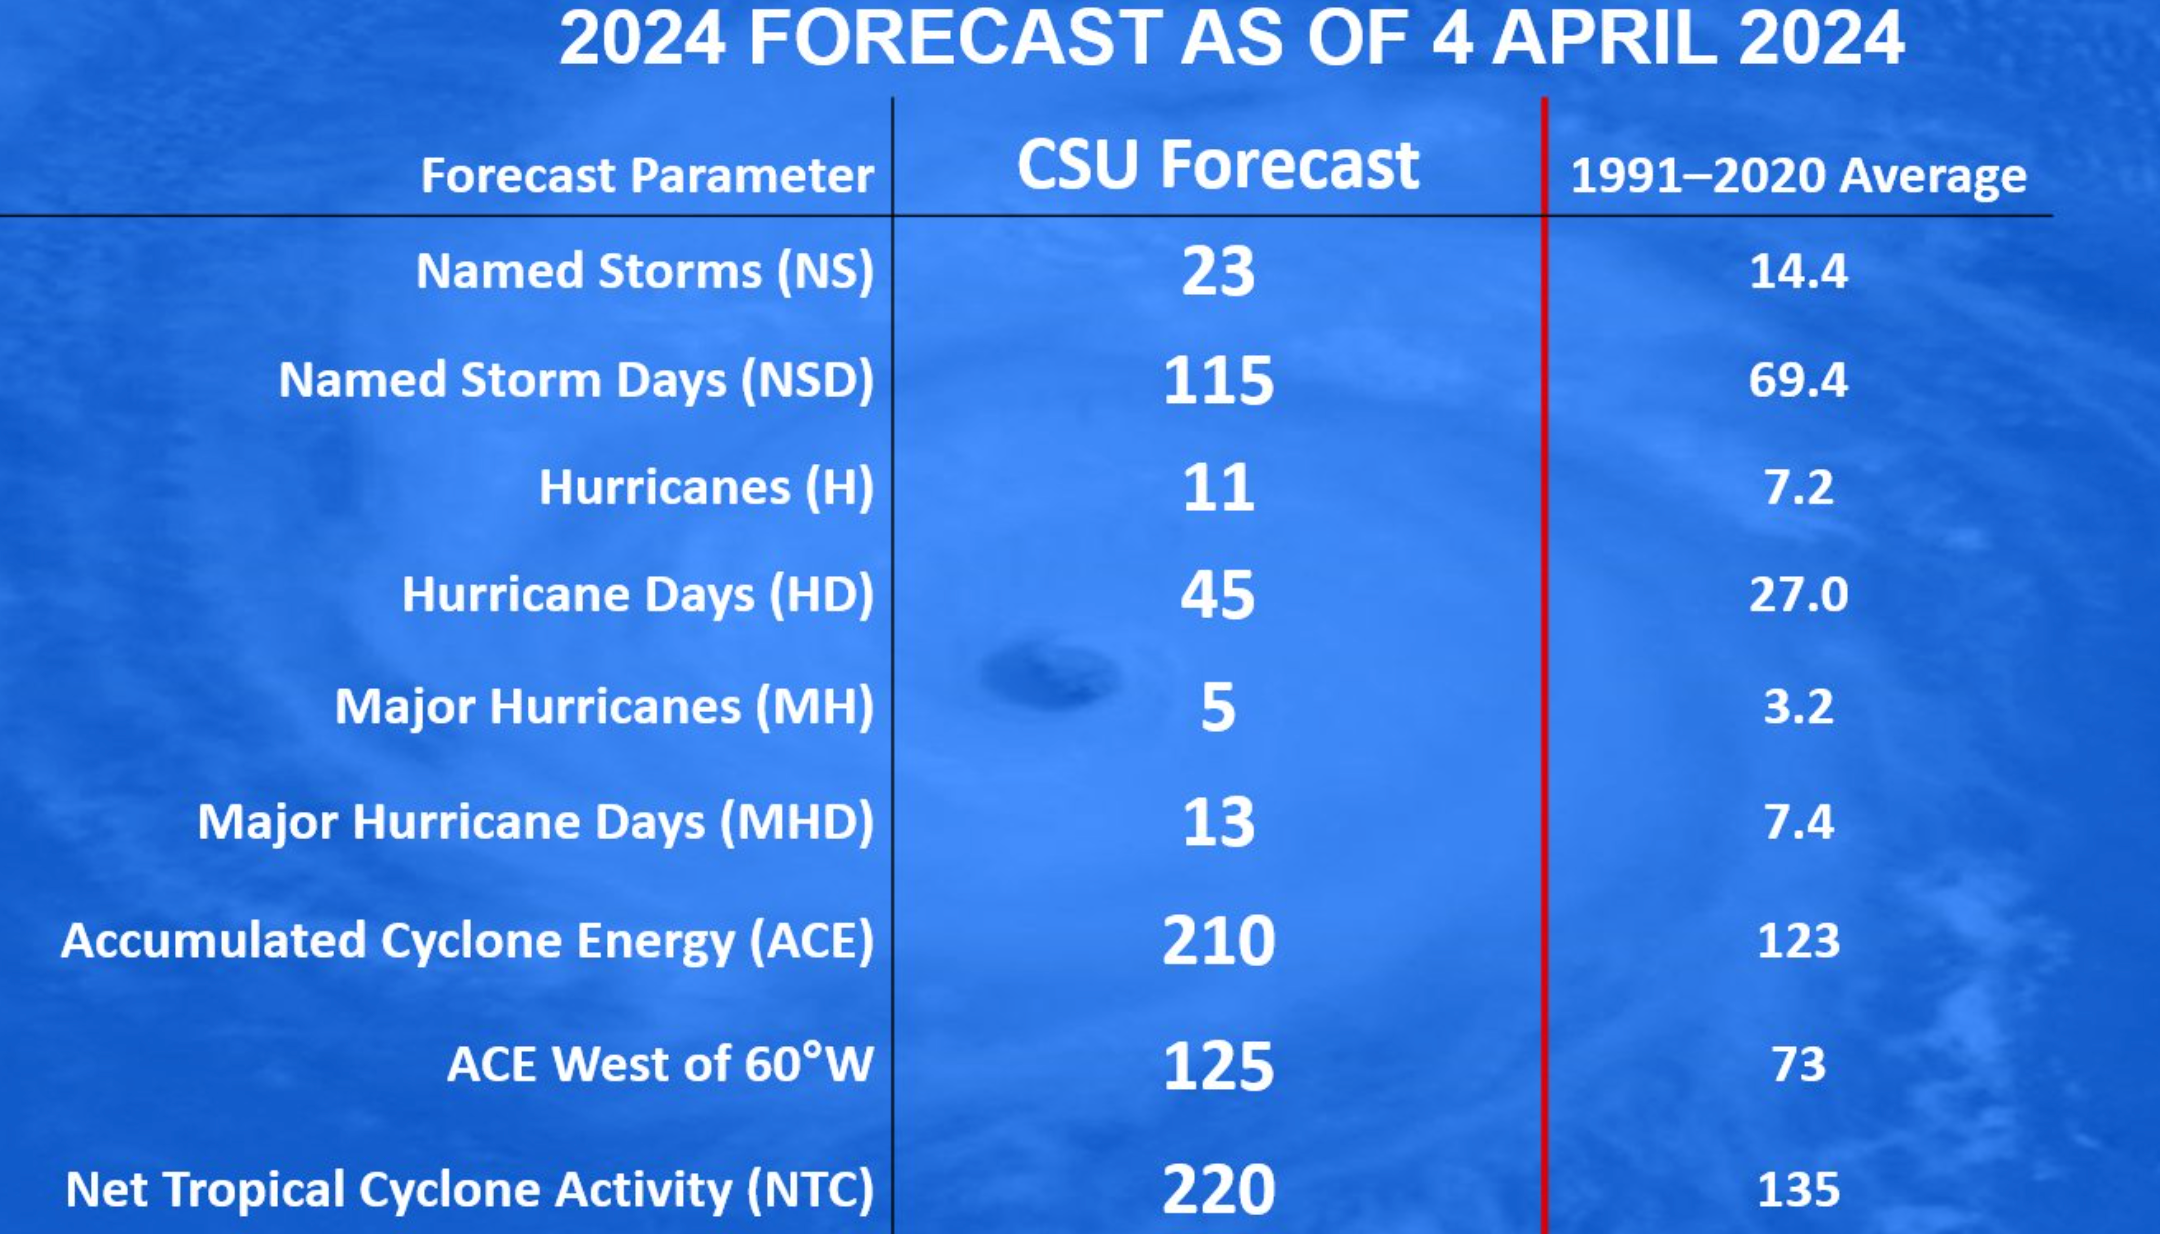 The 2024 Atlantic hurricane forecast, issued by Colorado State on 4 April 2024